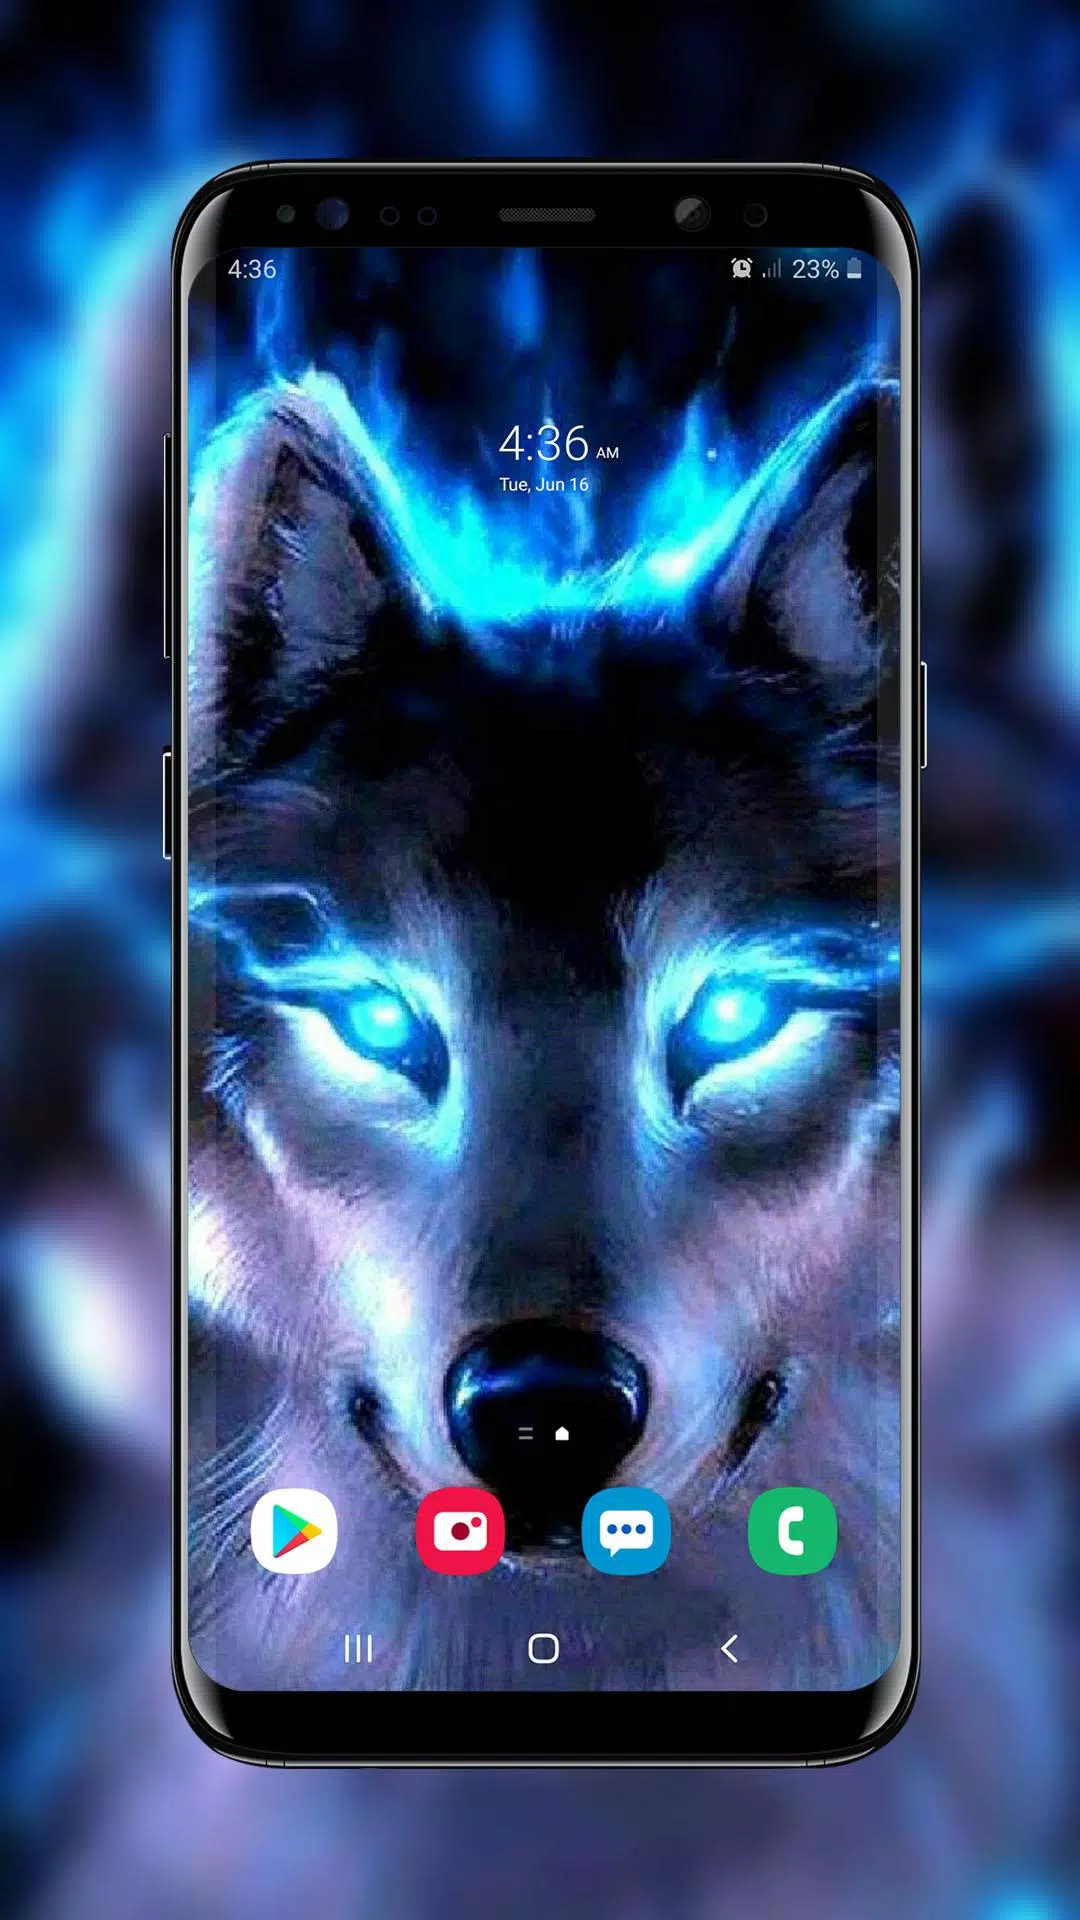 Ice Fire Wolf Wallpaper APK for Android Download